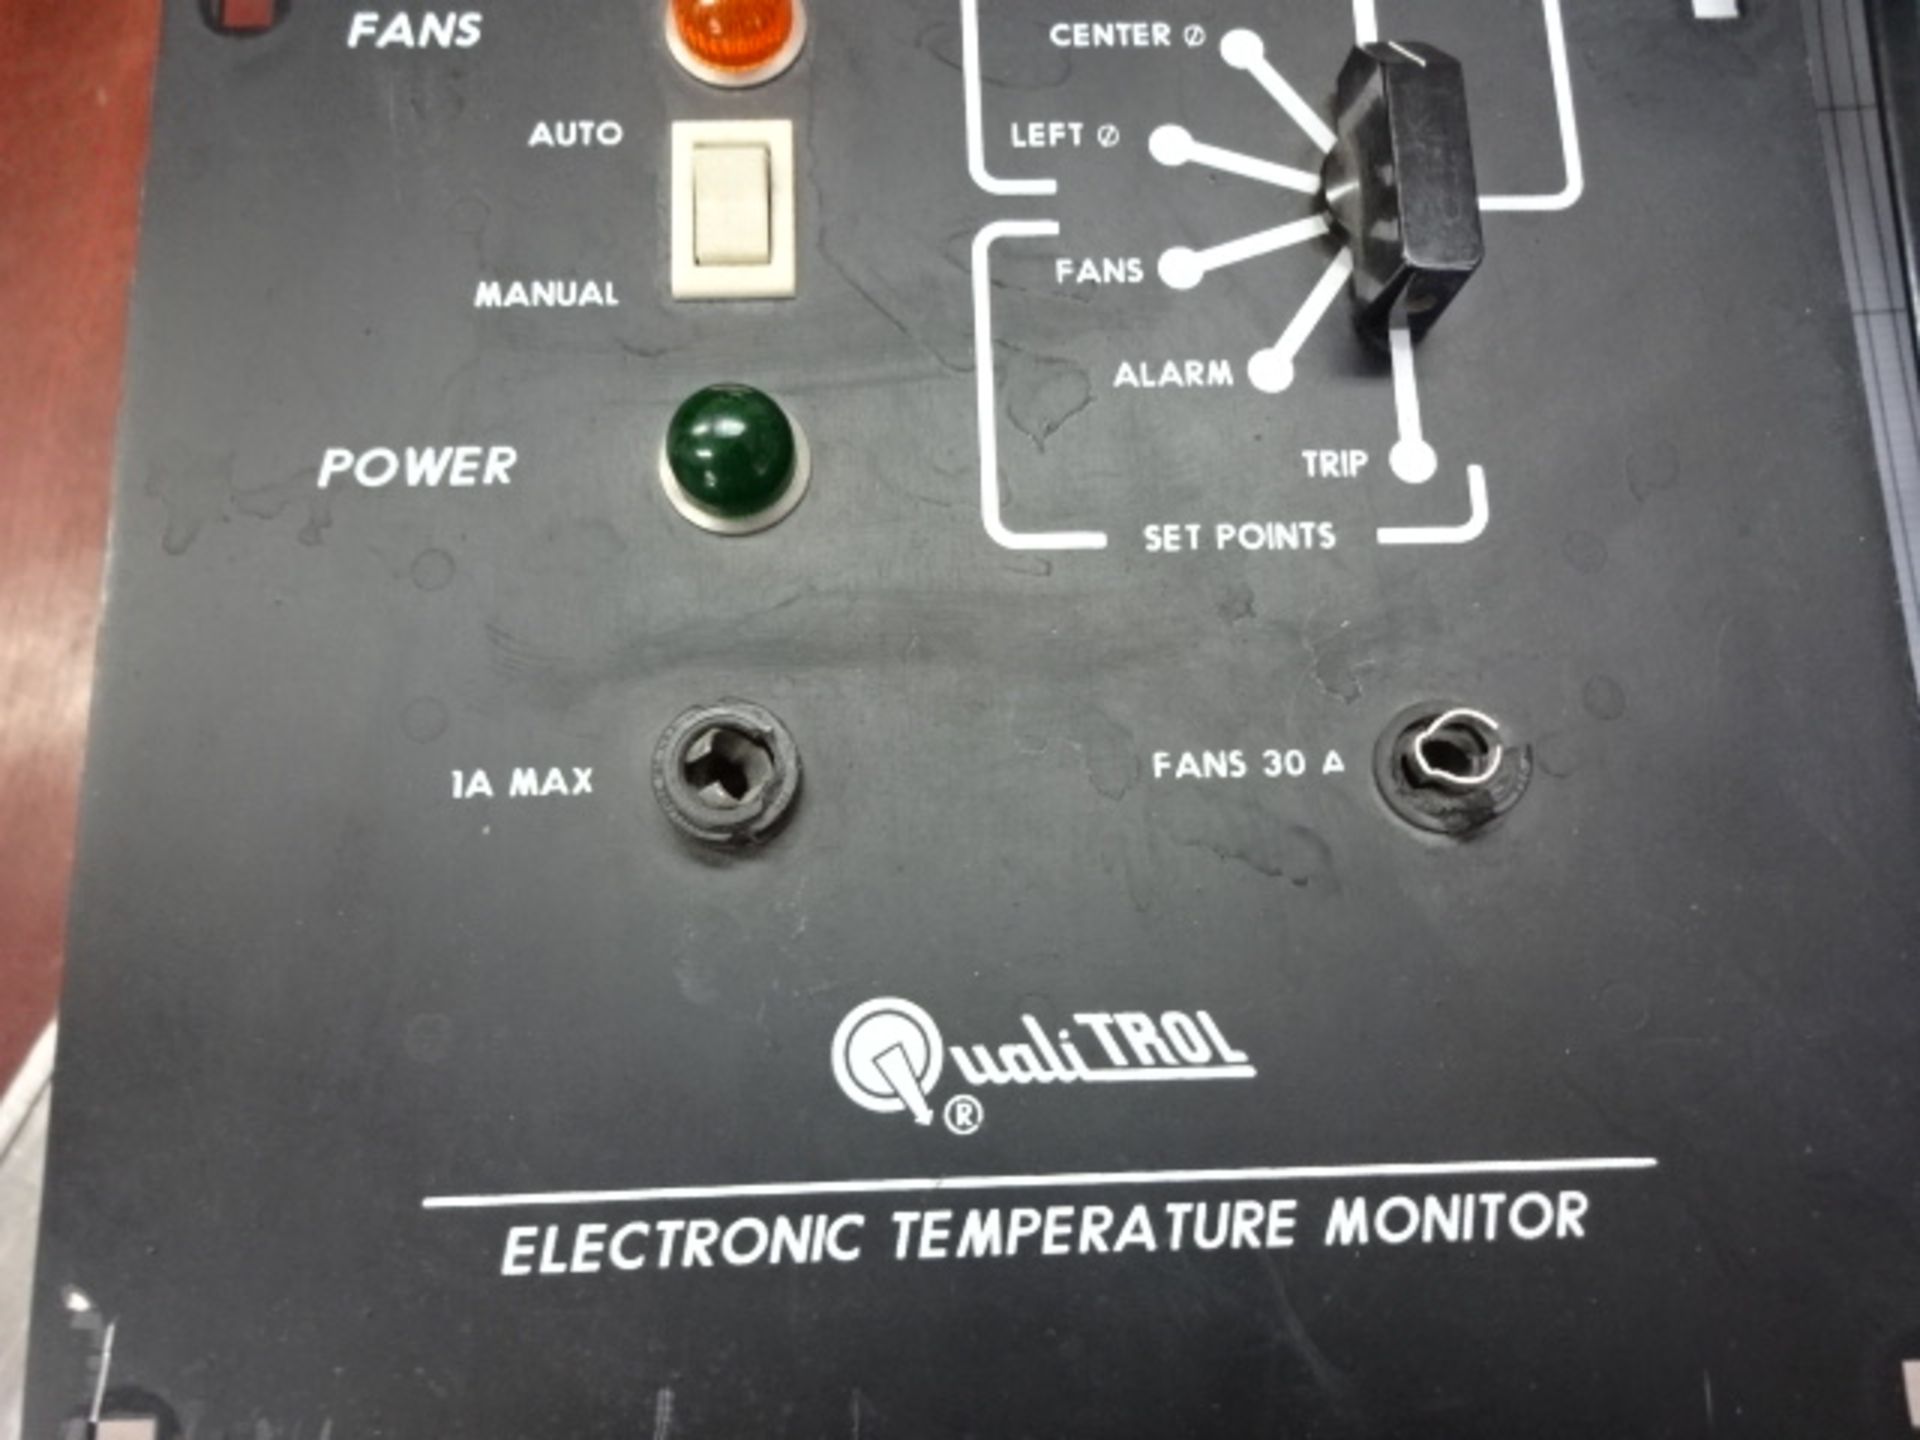 Qualitrol-108-009-01-Electronic-Temperature-Monitor-120-277-Vac - Image 3 of 4